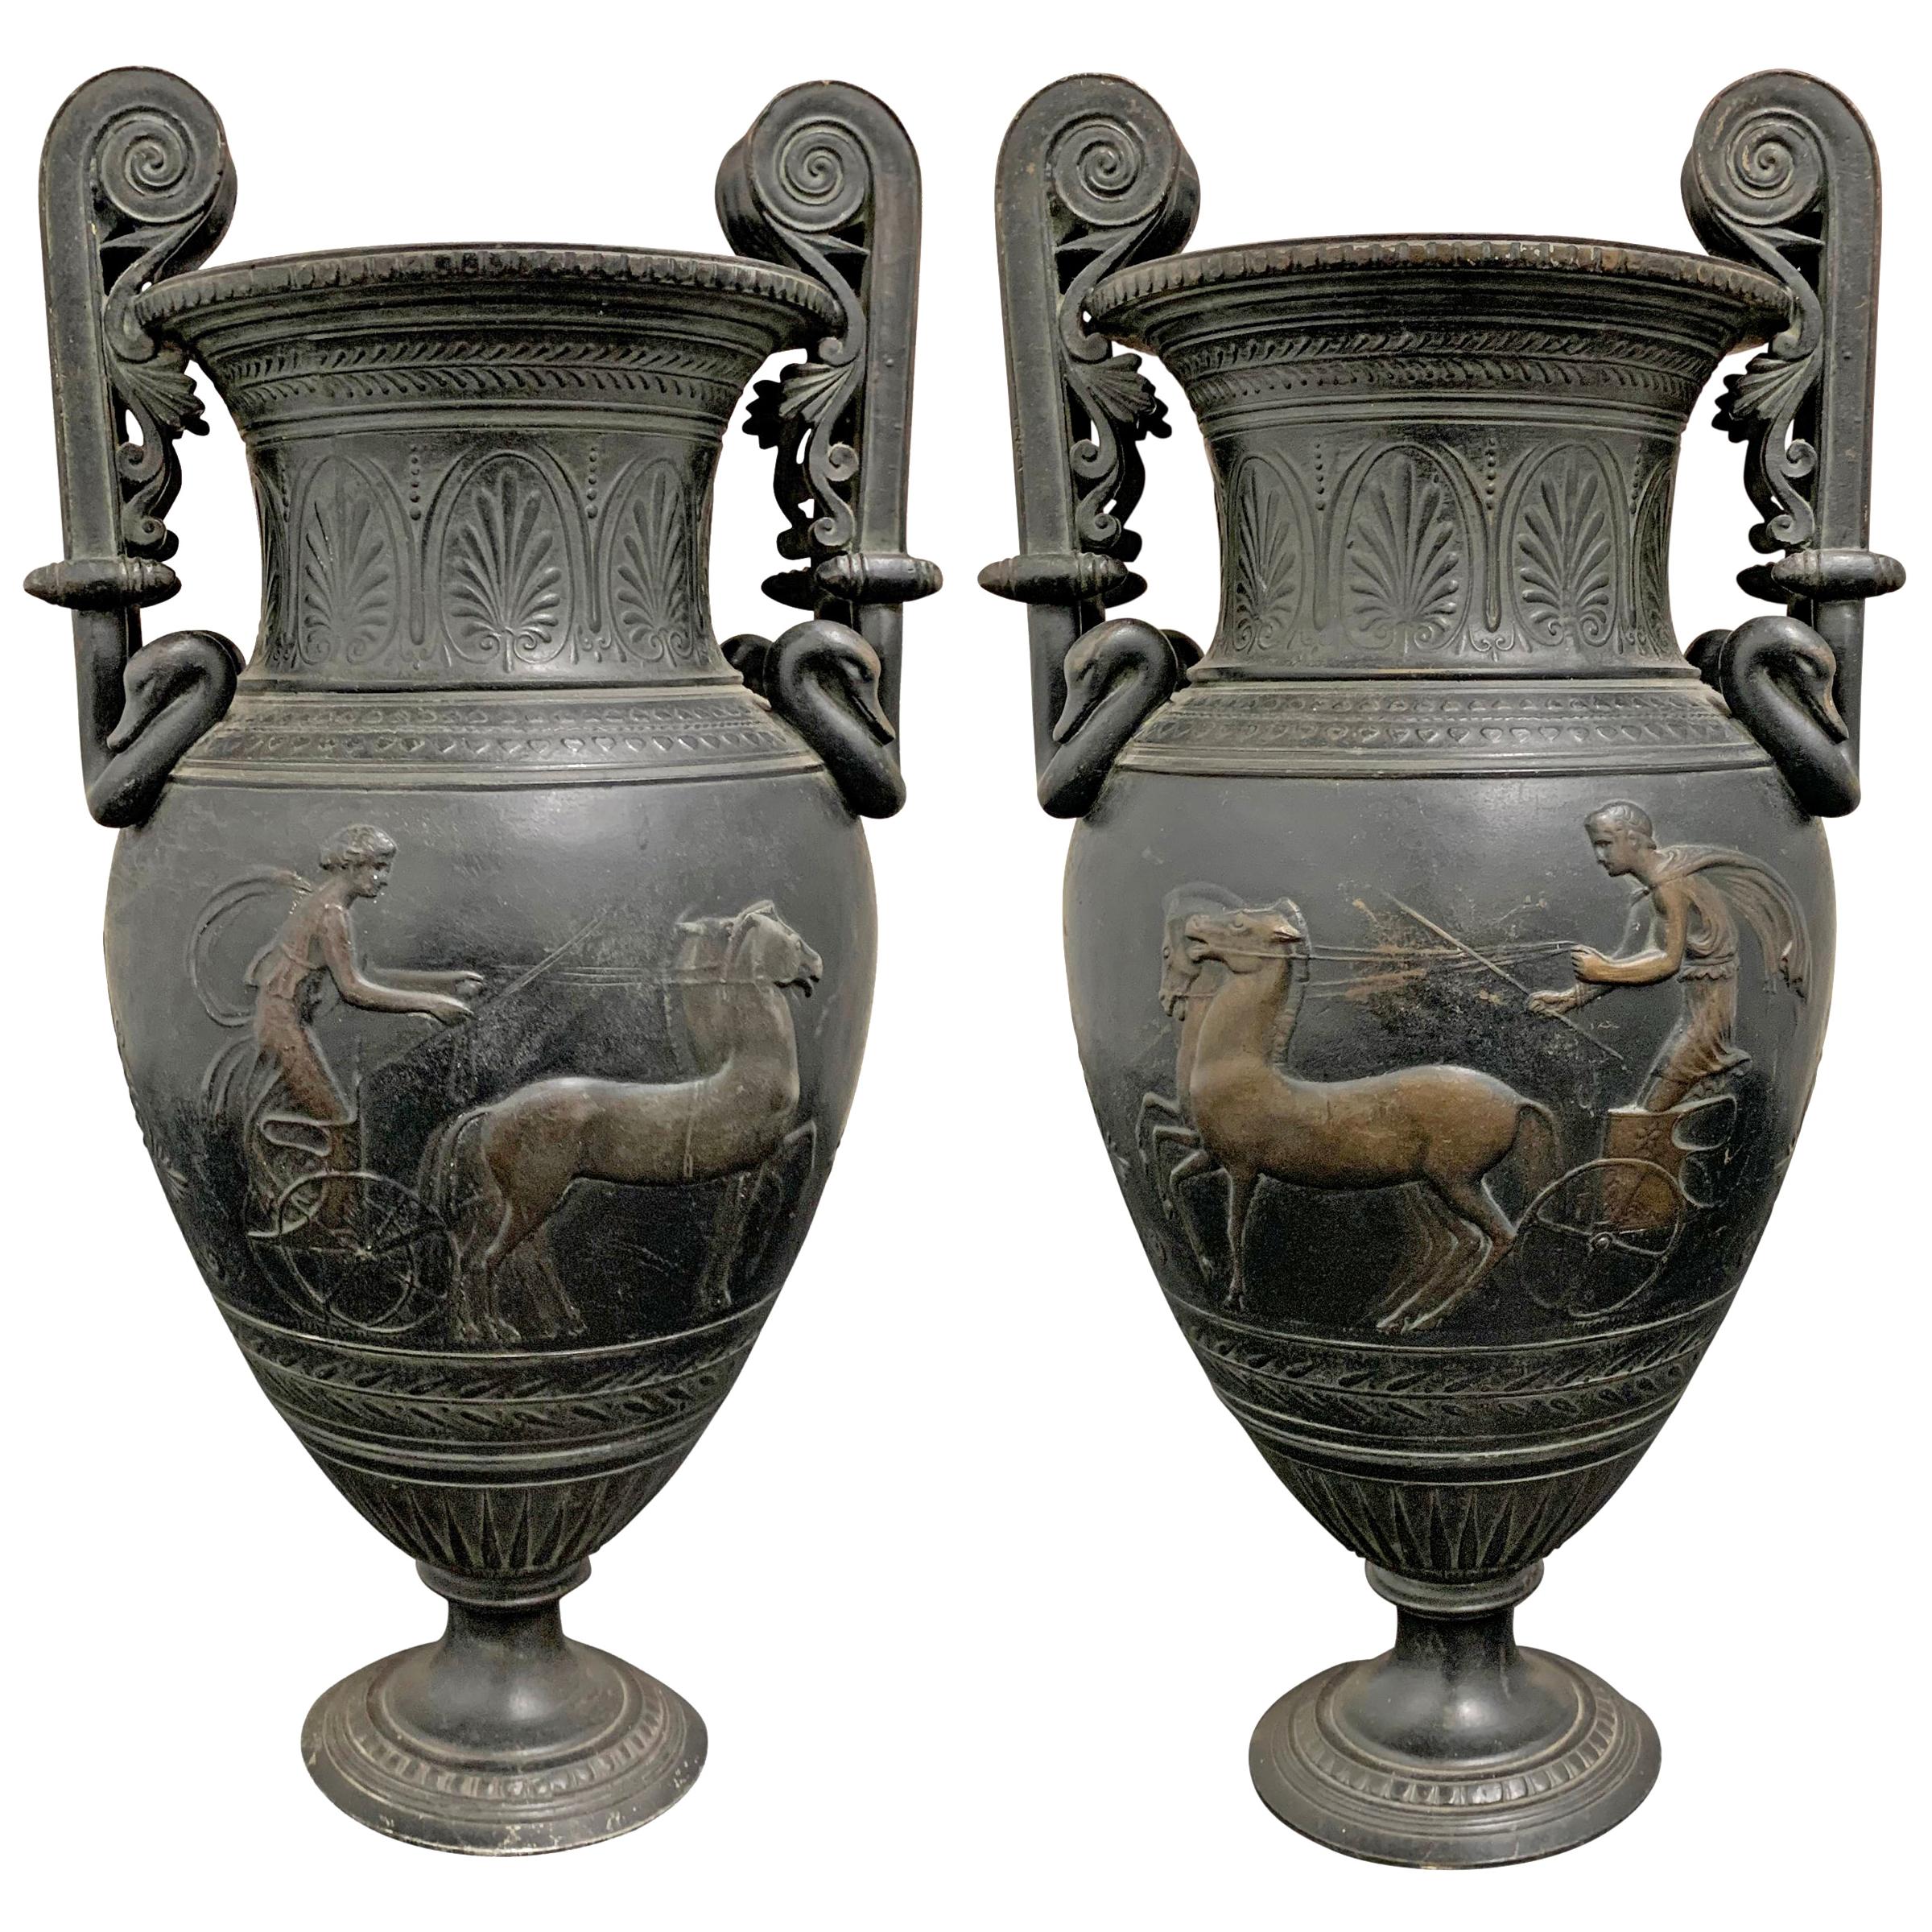 Pair of Early 20th Century Bronze Roman-Style Urns For Sale